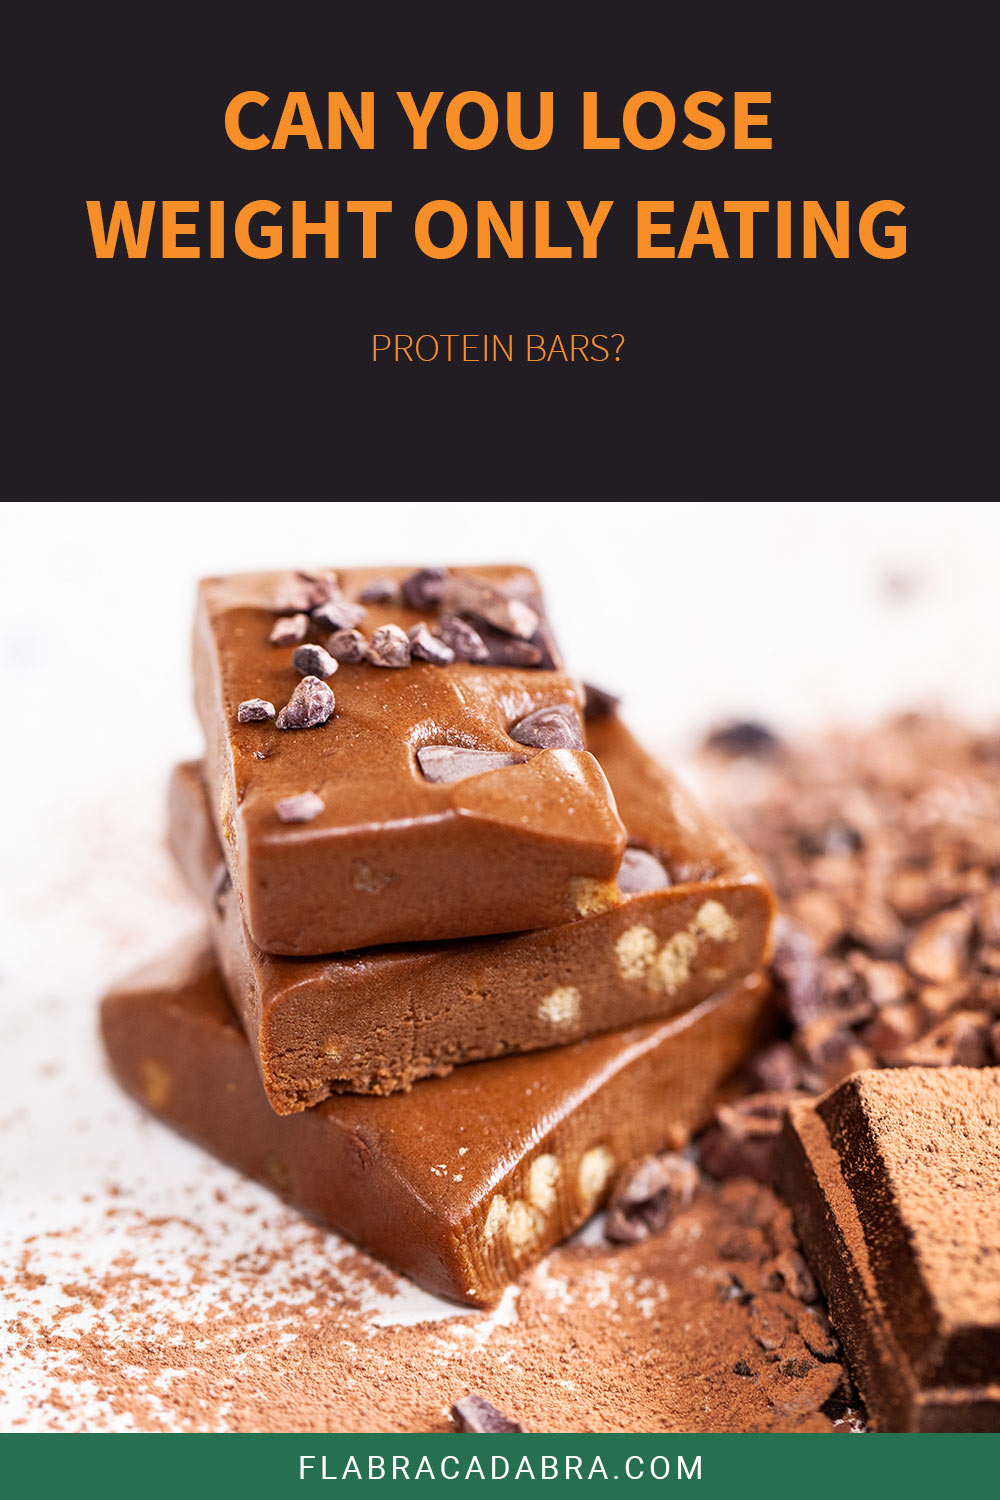 Can You Lose Weight Only Eating Protein Bars?